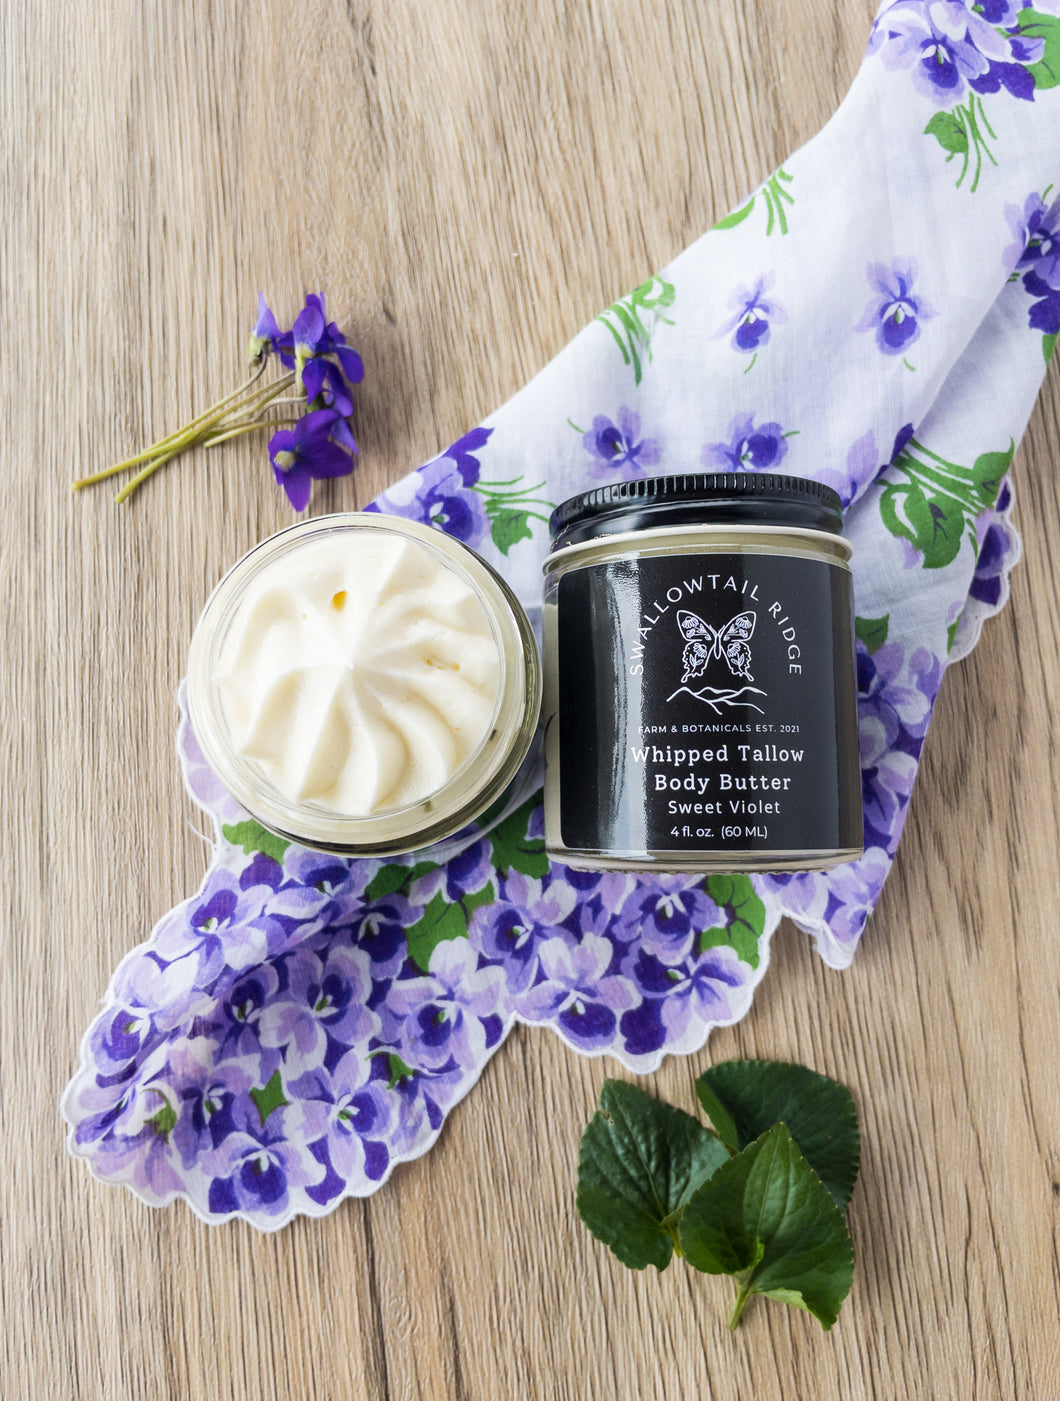 Sweet Violet Whipped Tallow Body Butter